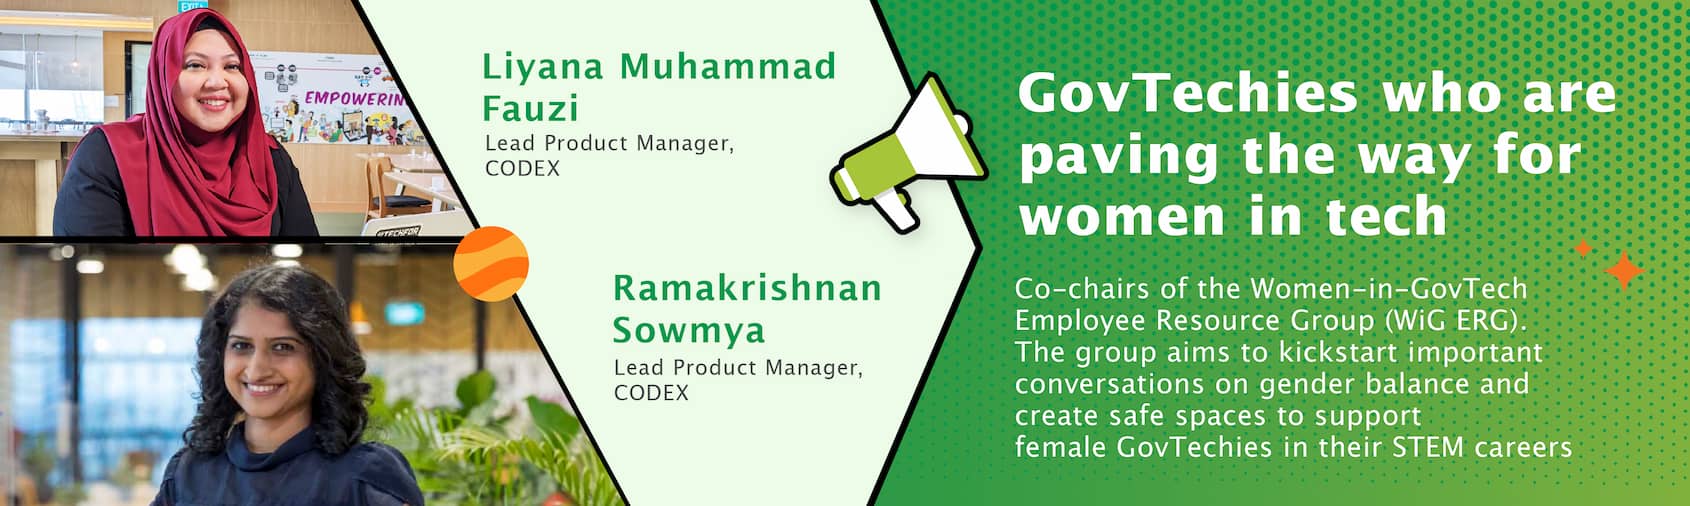 GovTechies - Lead Product Managers from the CODEX team promoting gender balance initiatives